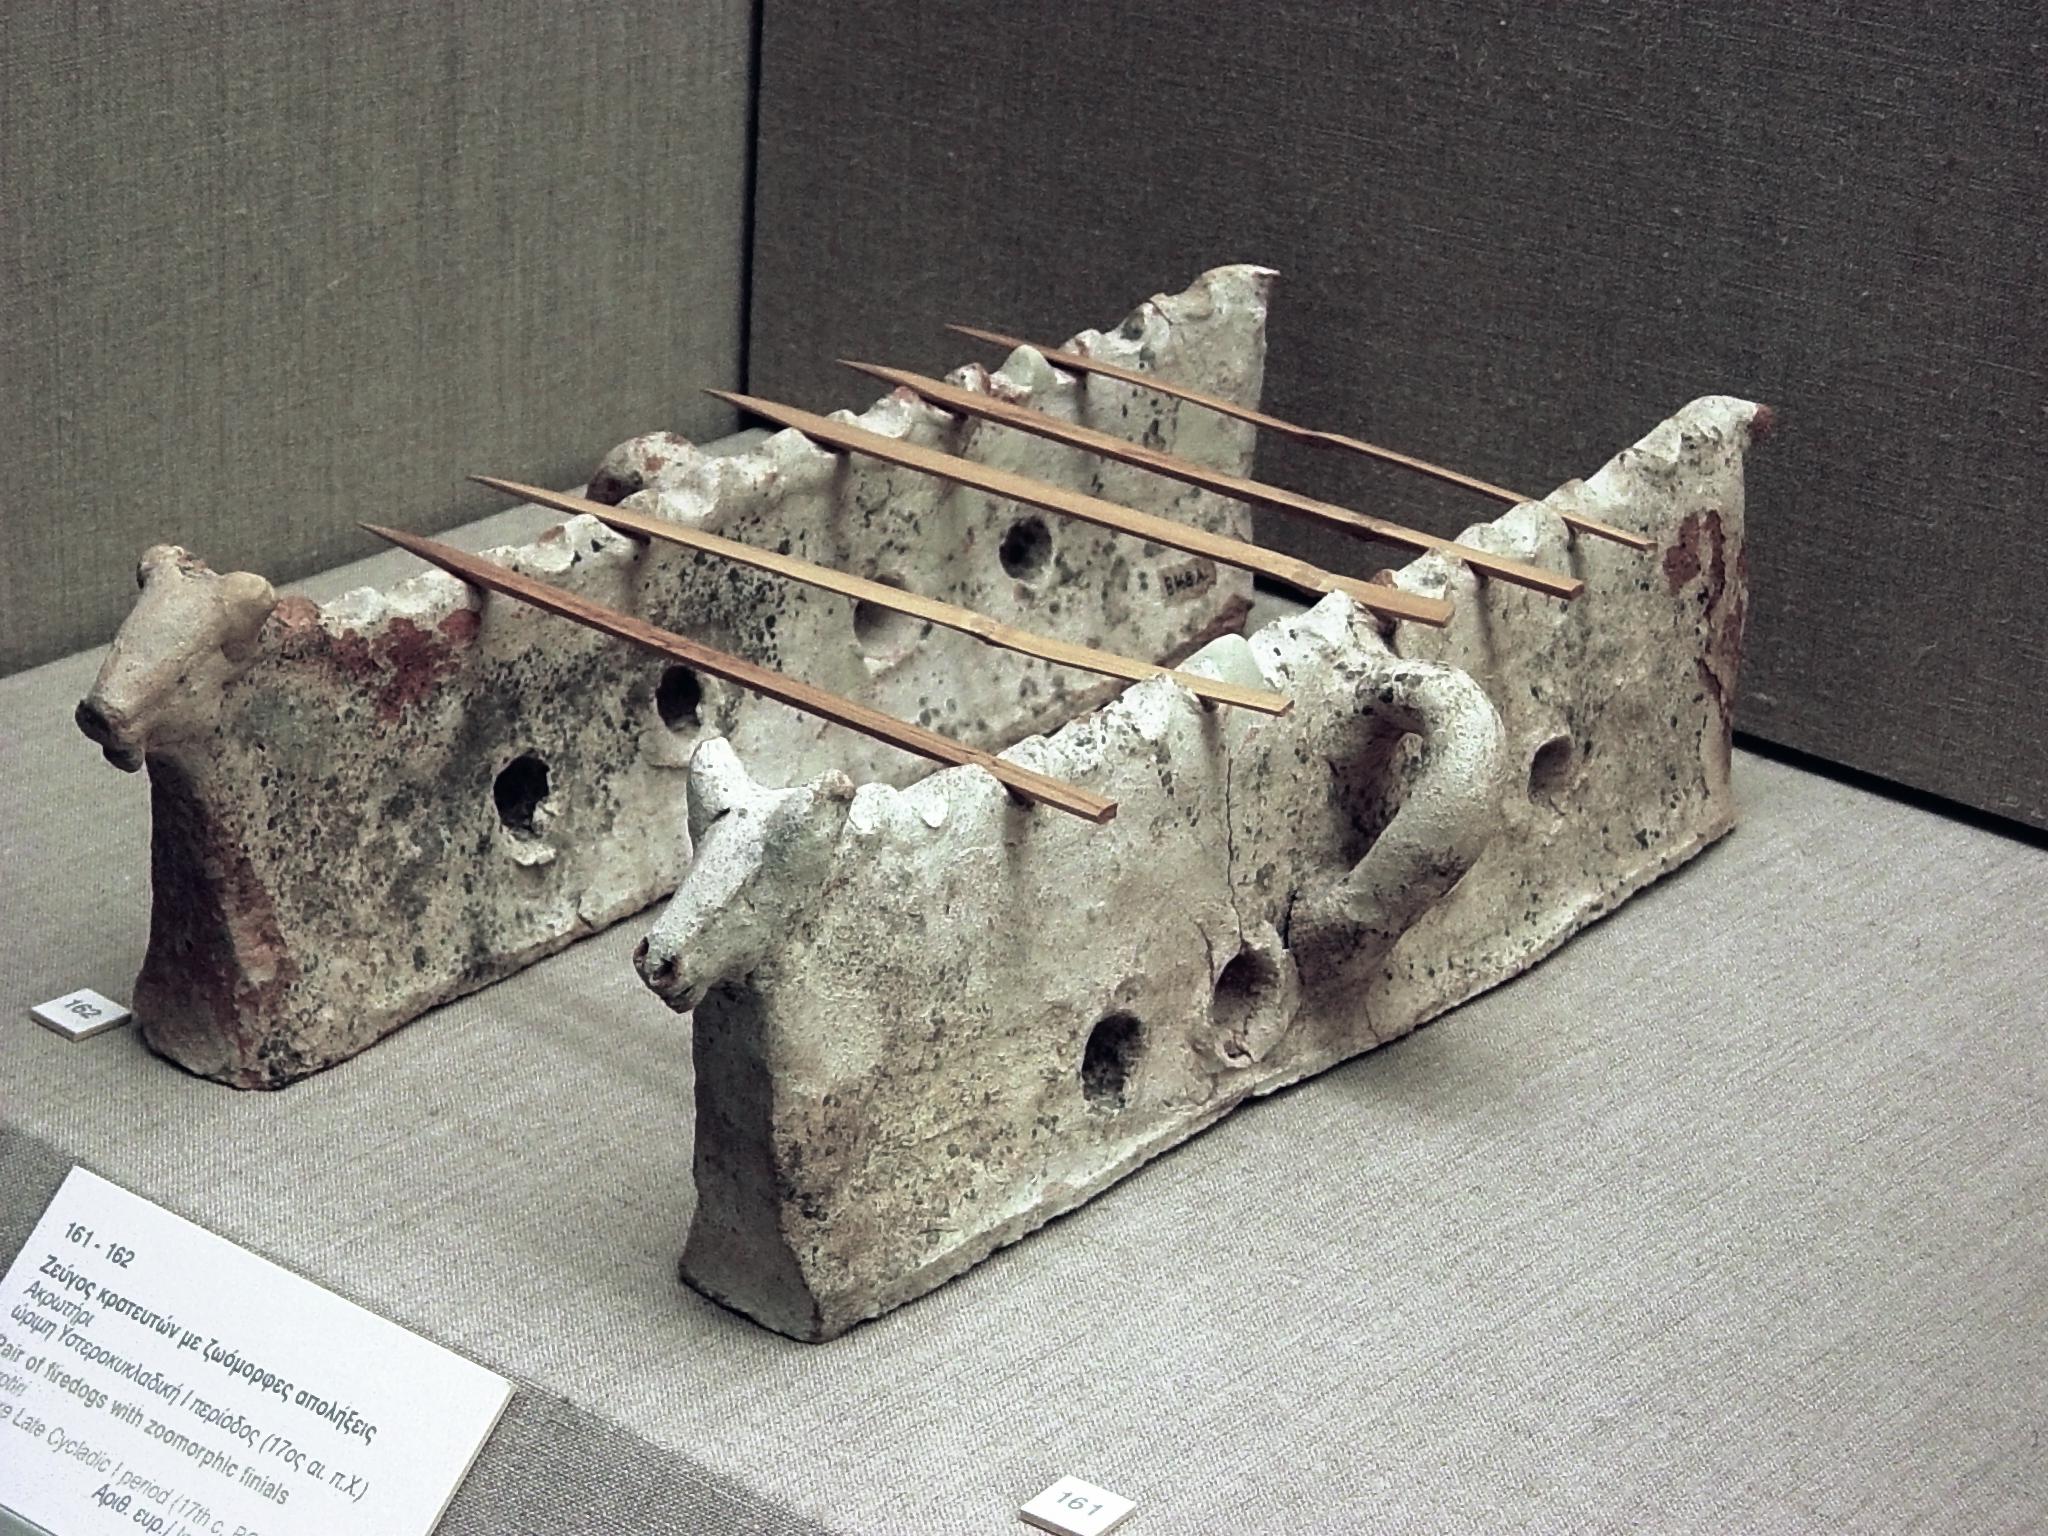 Stone cooking supports used to grill skewers of meat by Minoans on Santorini, circa 1600 BCE. The line of holes in the base supplied coals with oxygen. Many consider modern "souvlaki" street kebabs a direct descendant of this portable food system. Museum of Prehistoric Thera, Greece.